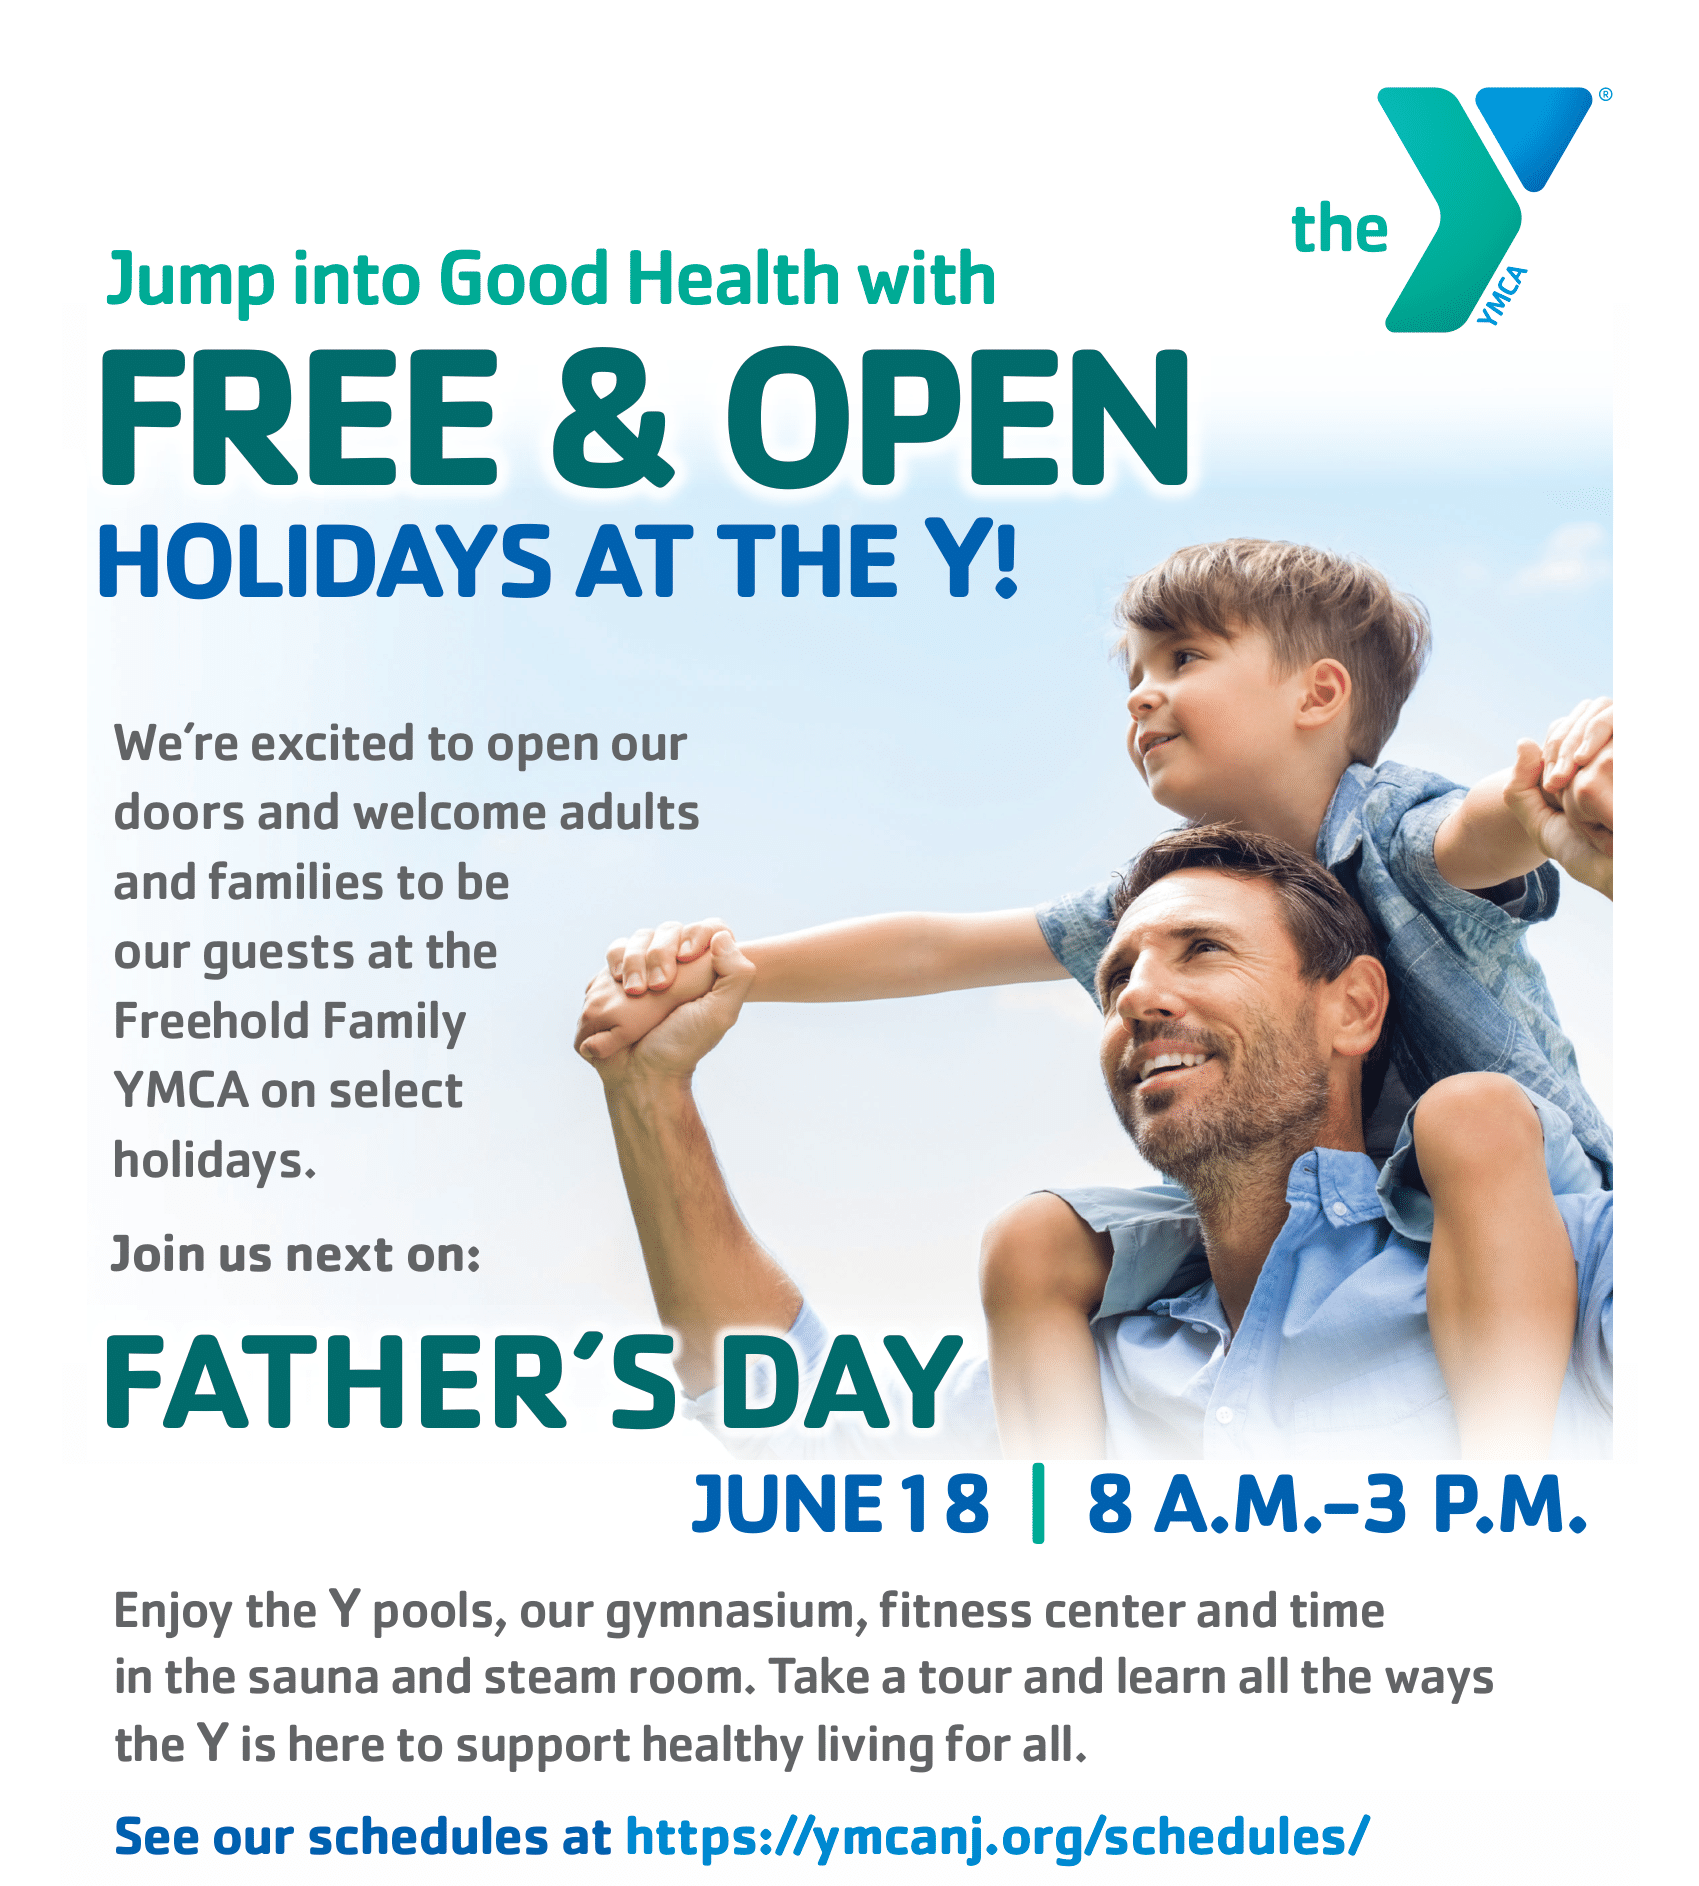 Father's Day | Free & Open @ YMCA of Greater Monmouth County